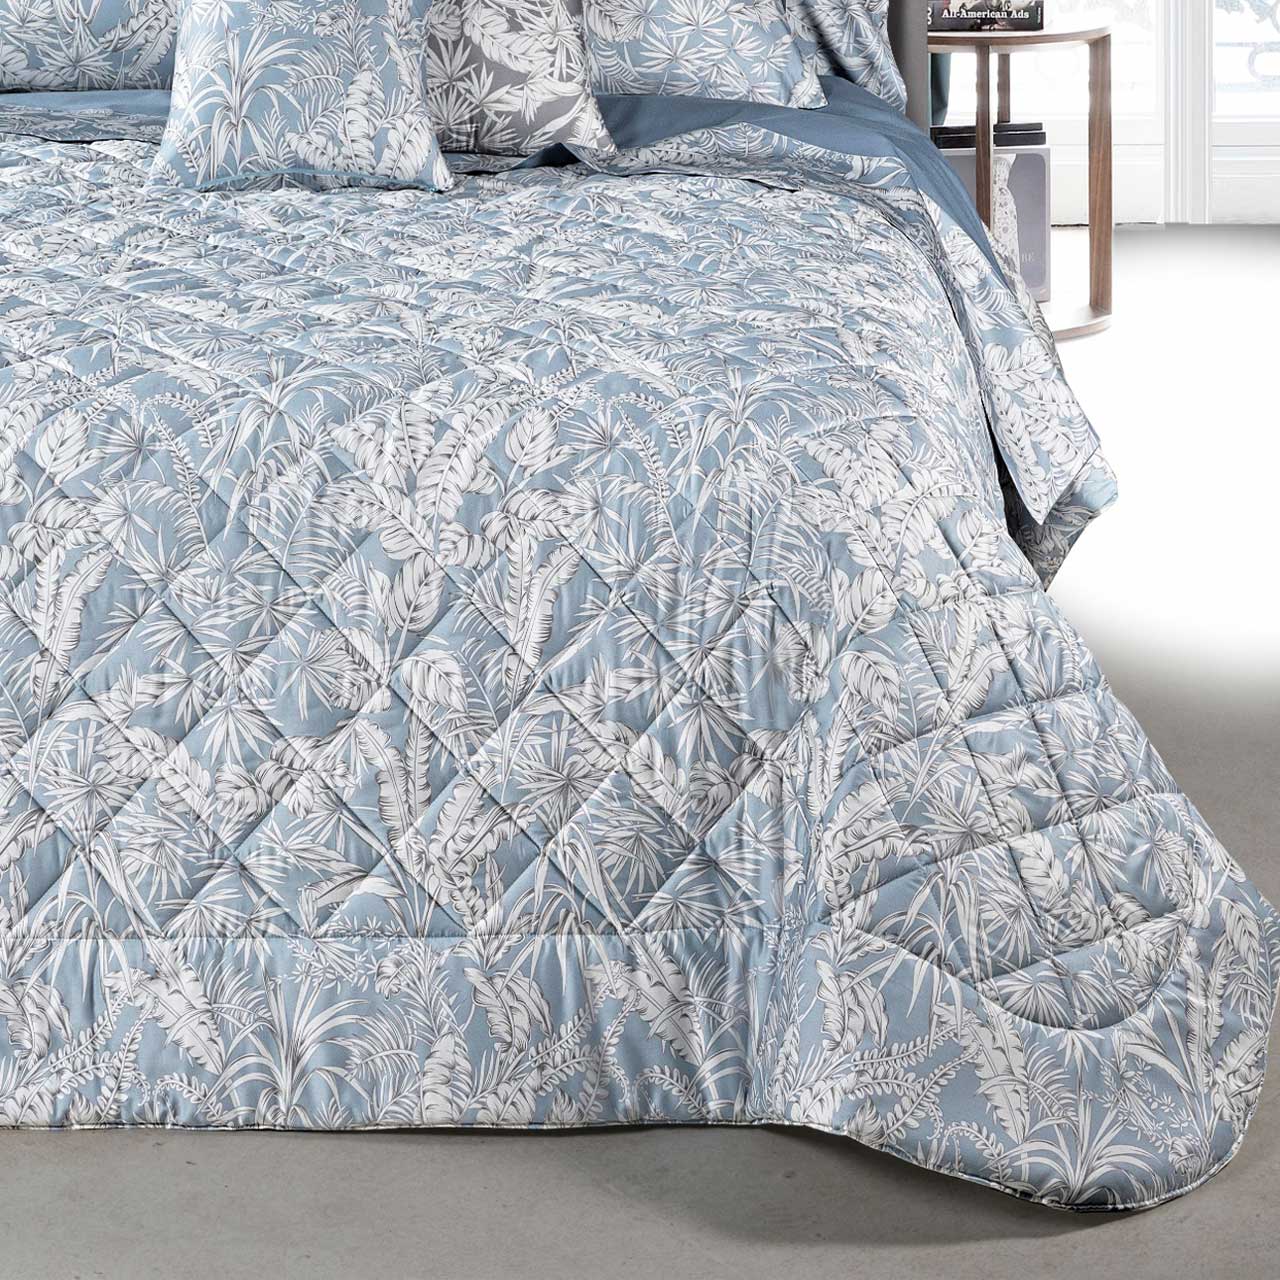 quilted bed covers online